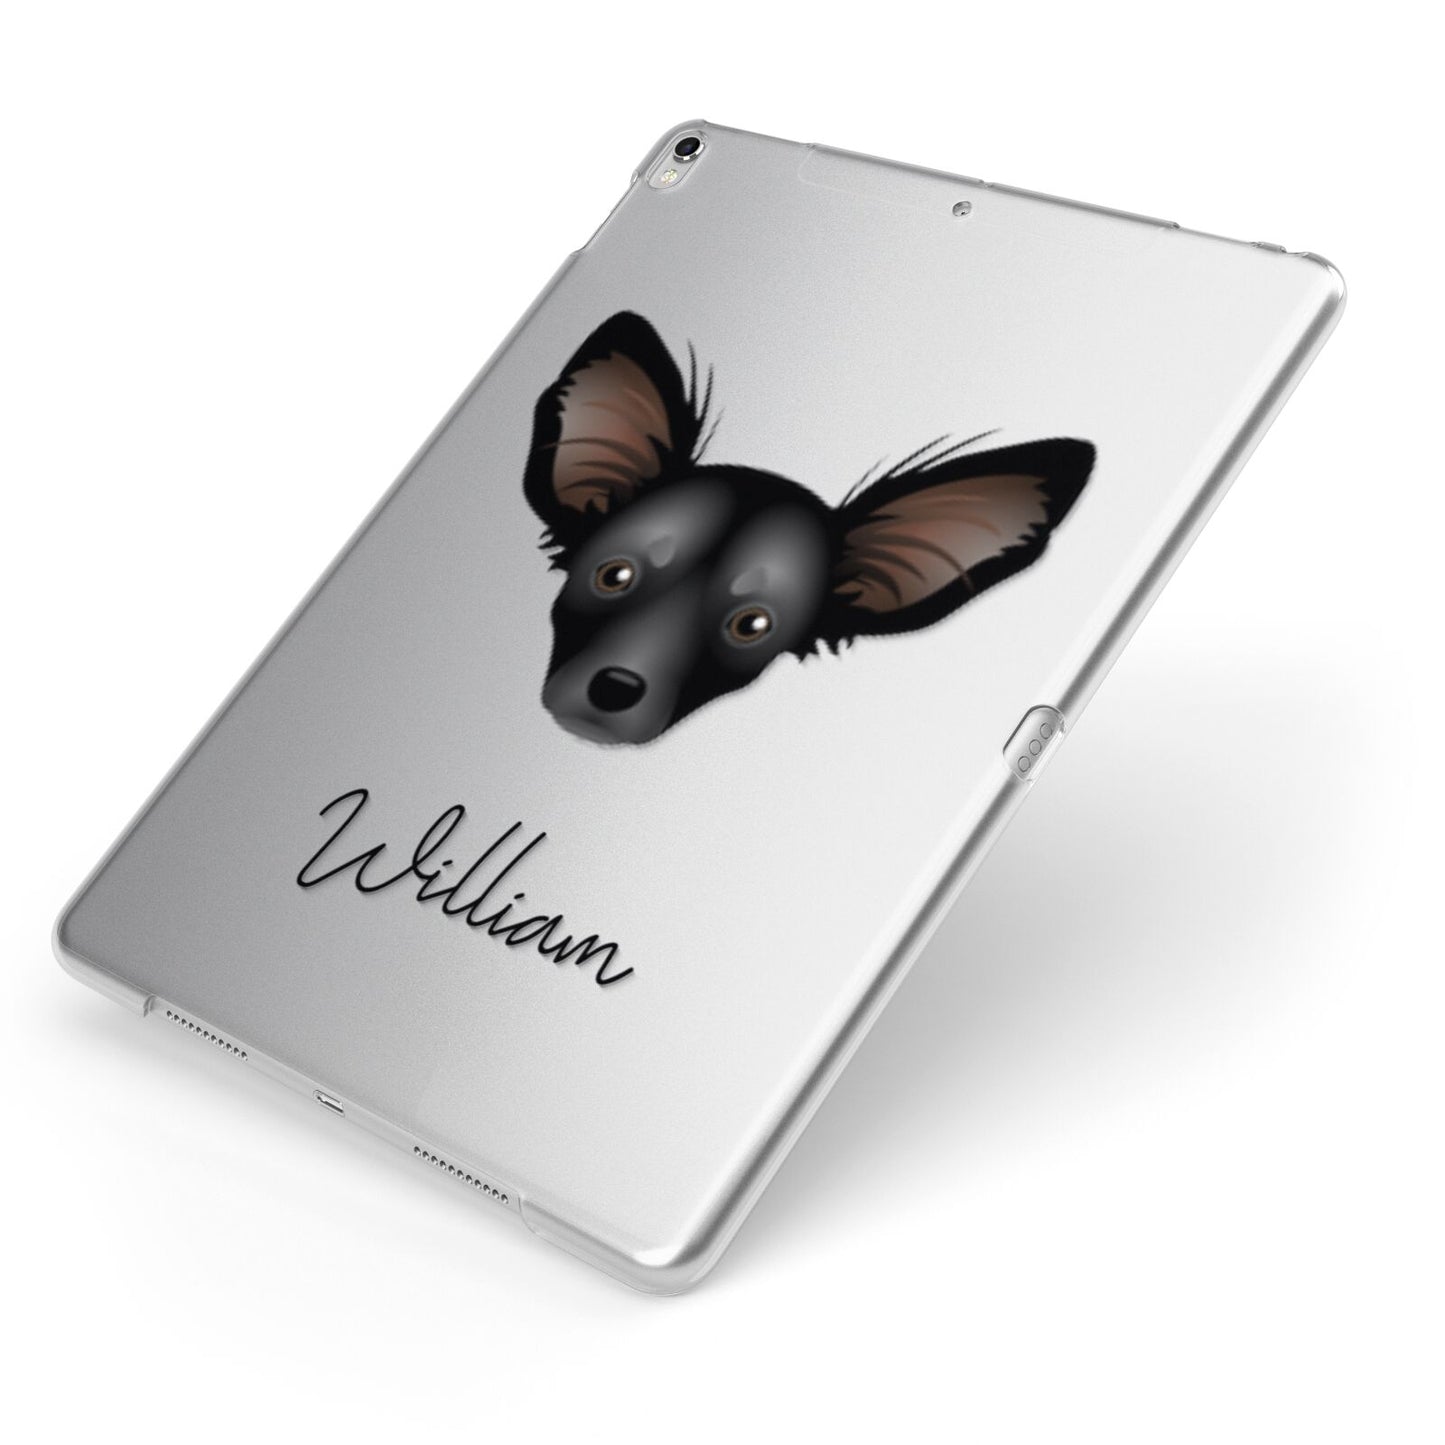 Russian Toy Personalised Apple iPad Case on Silver iPad Side View